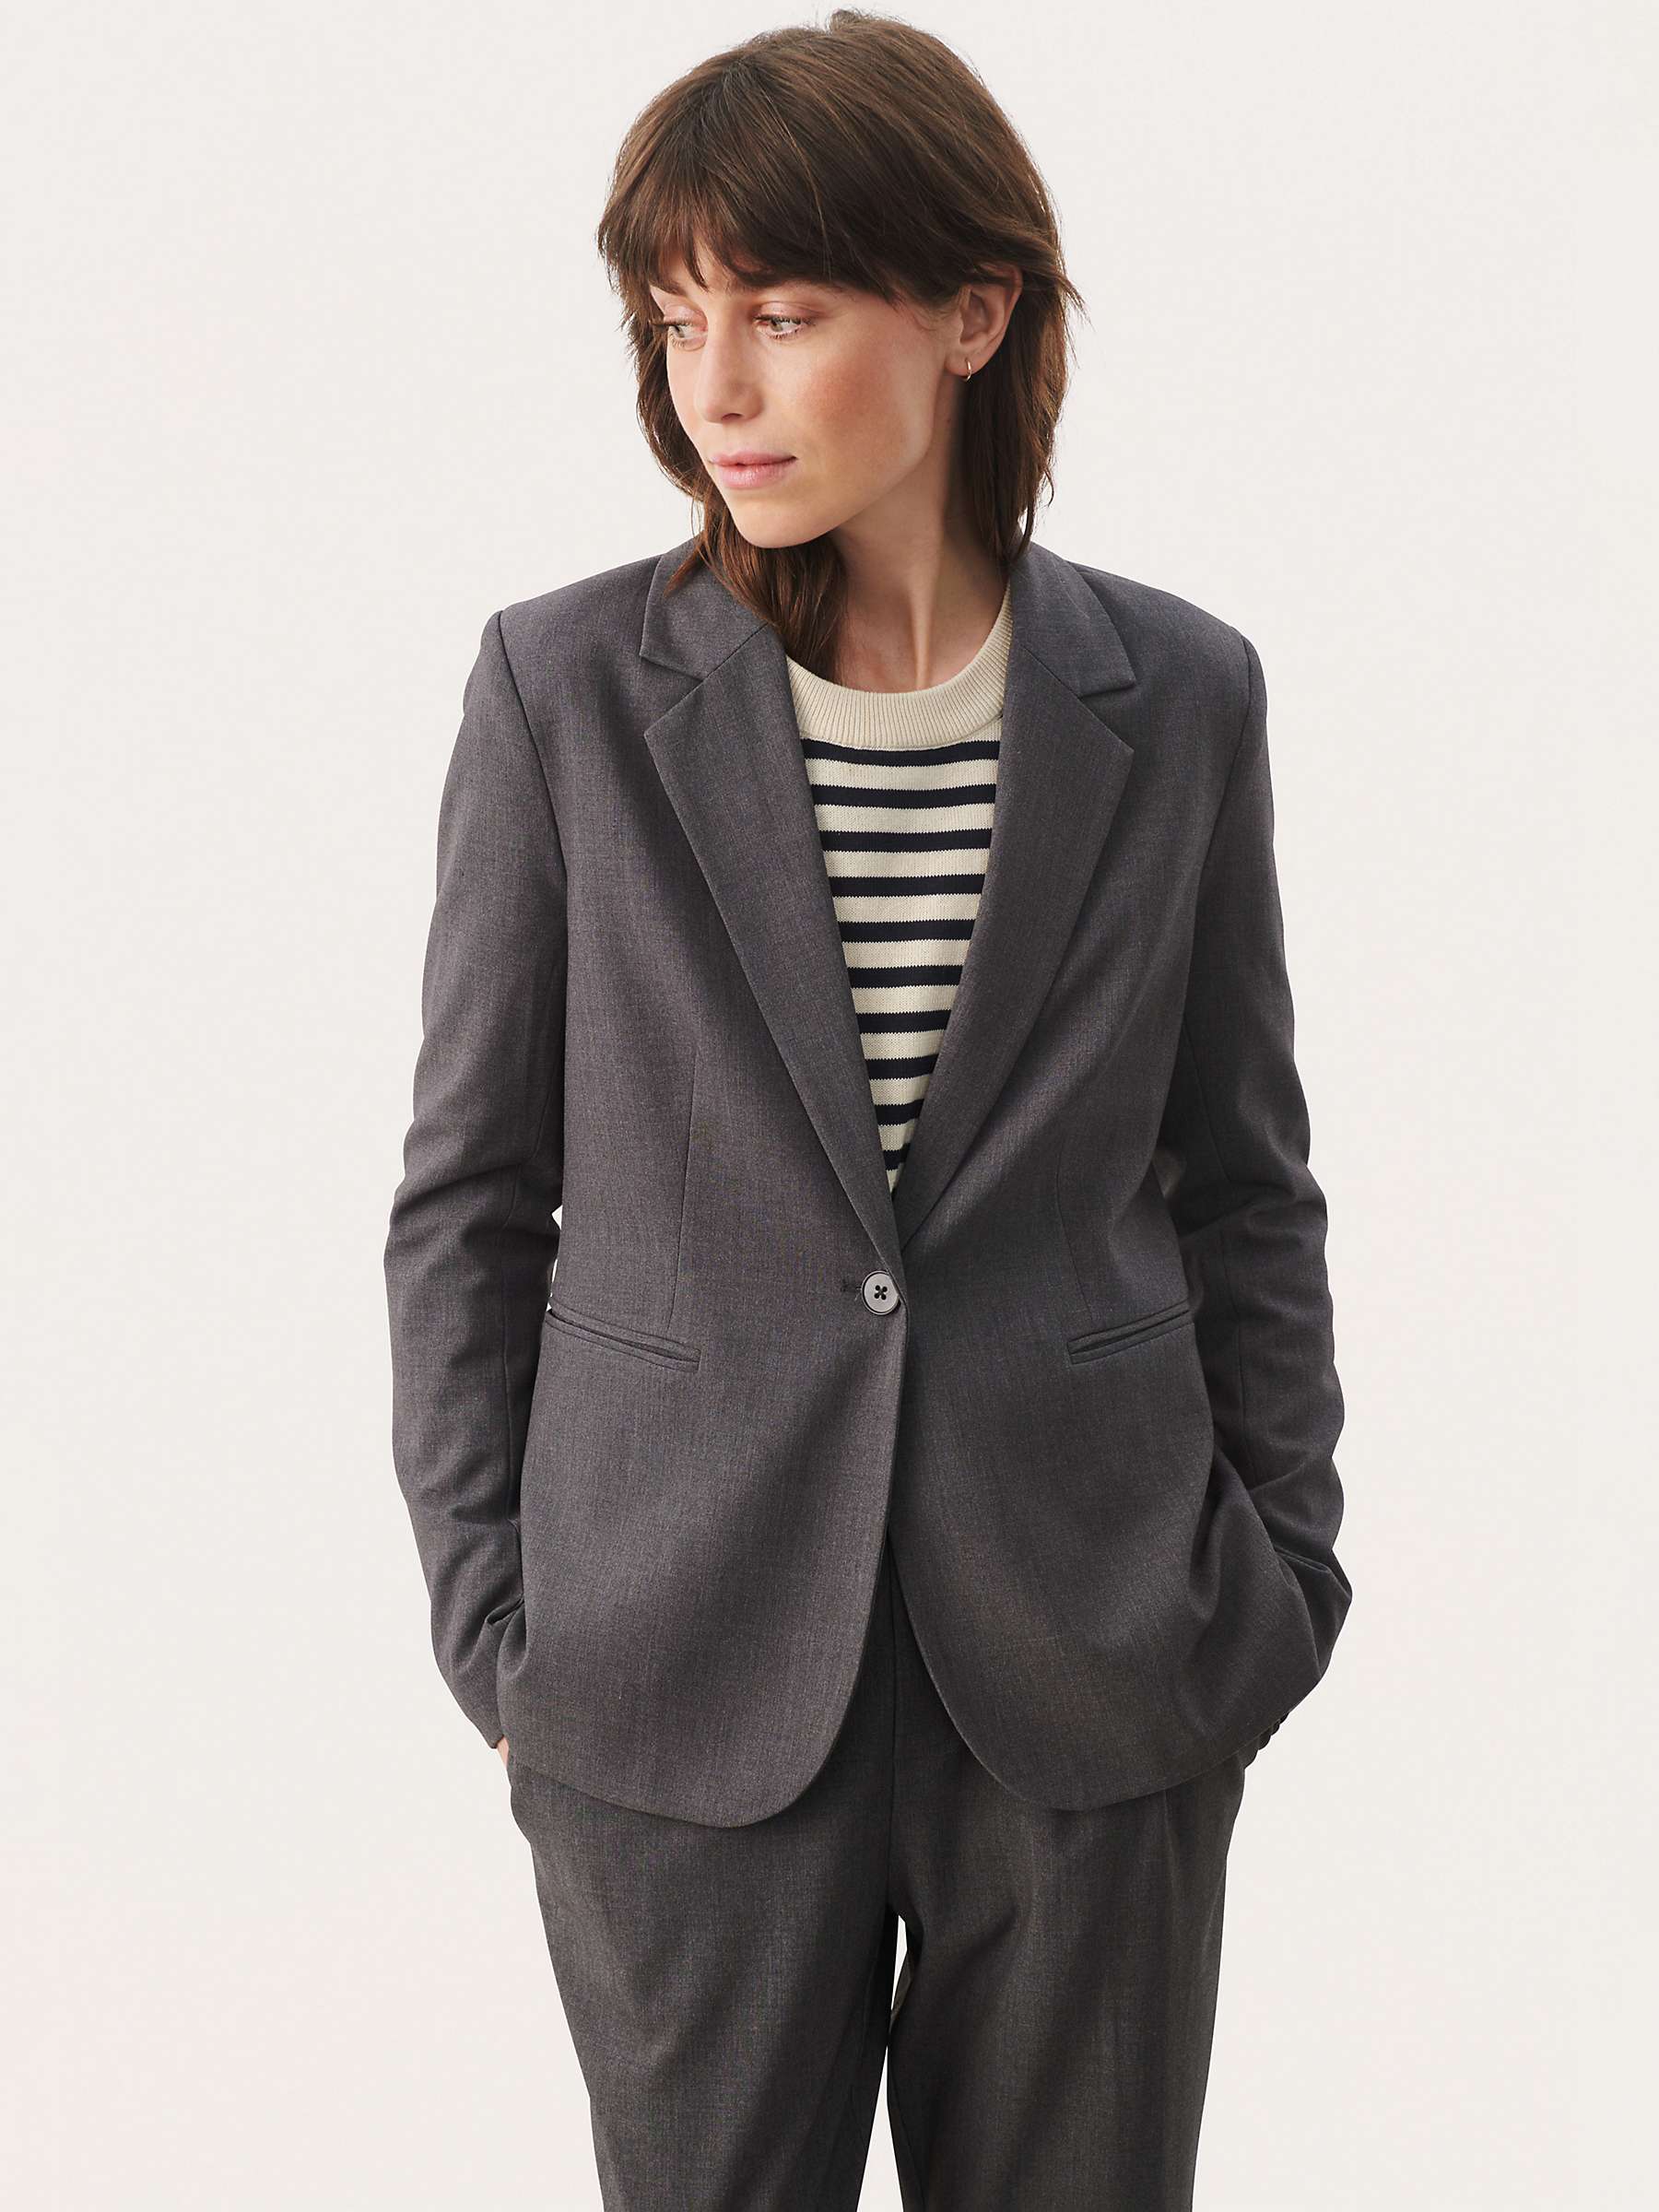 Buy Part Two Taylors Blazer Online at johnlewis.com